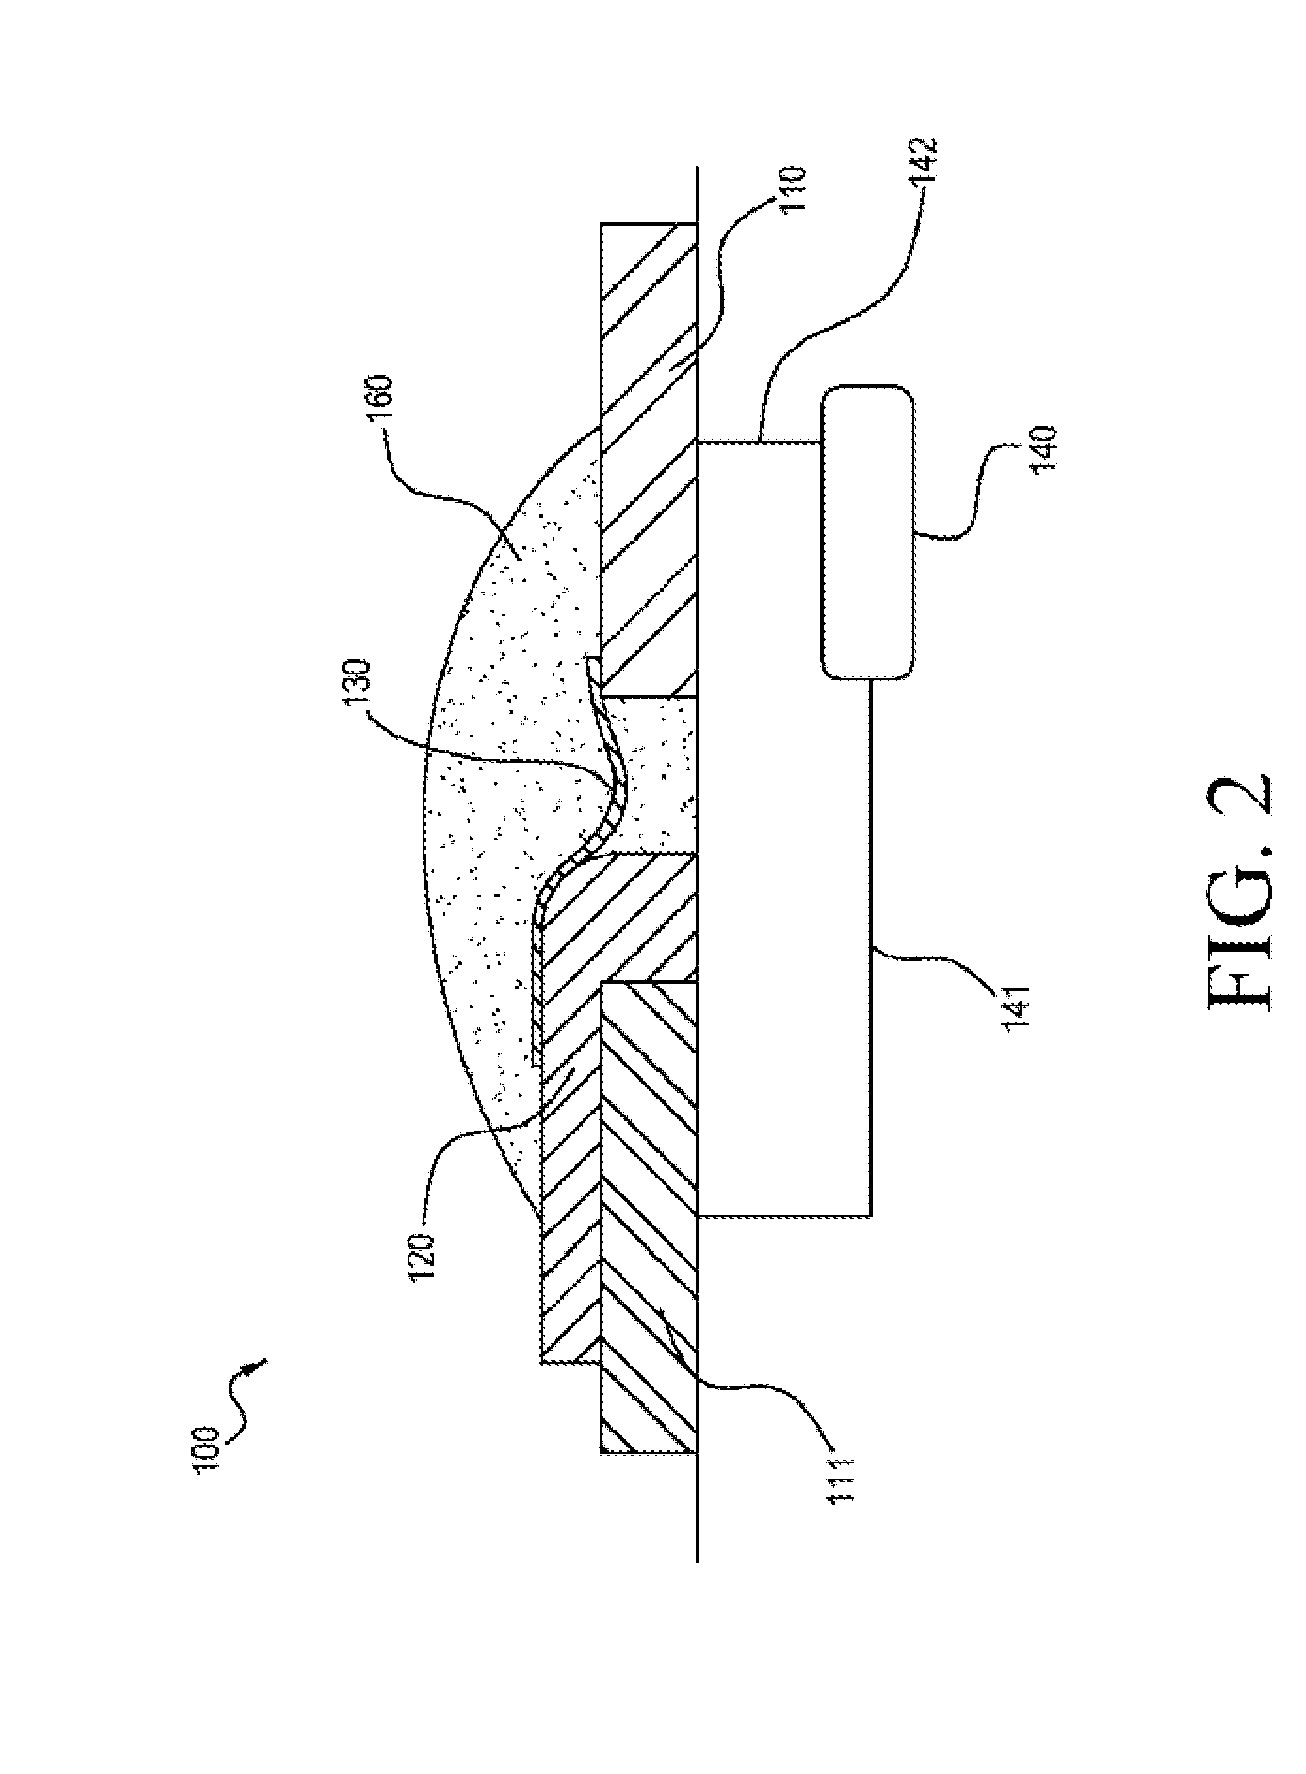 Graphene screening and separation method and device